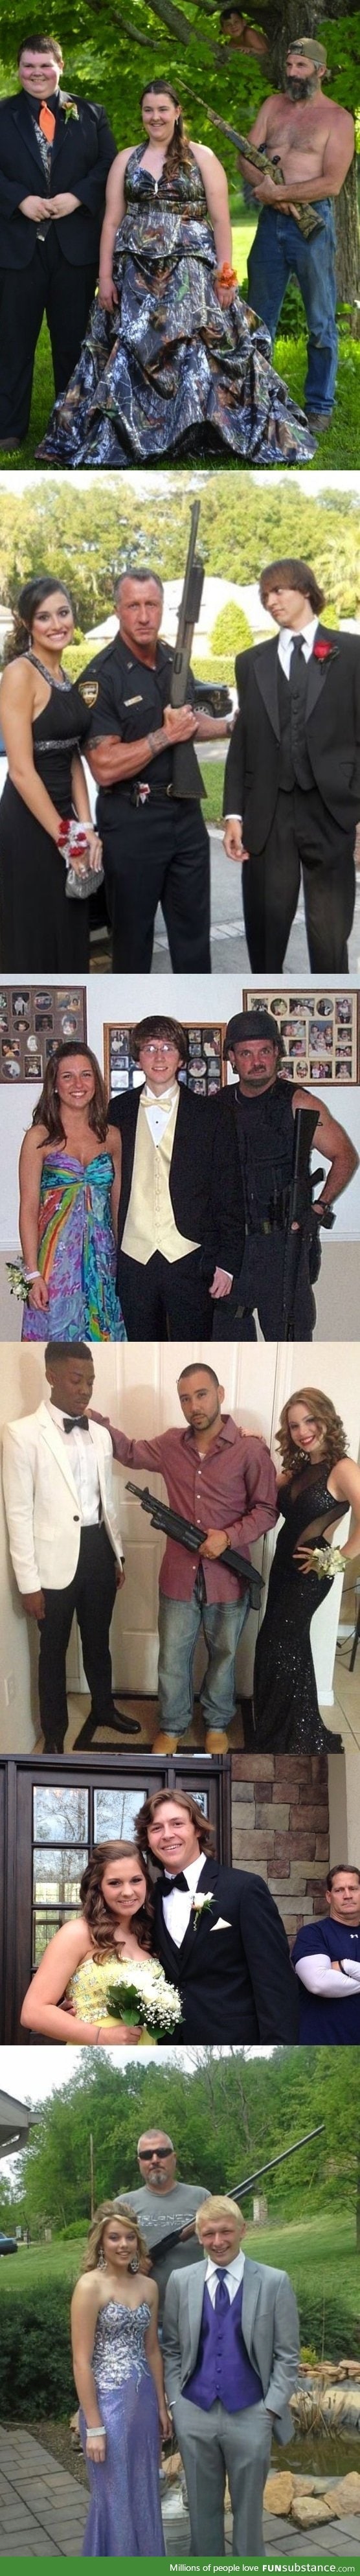 Just some normal prom pictures